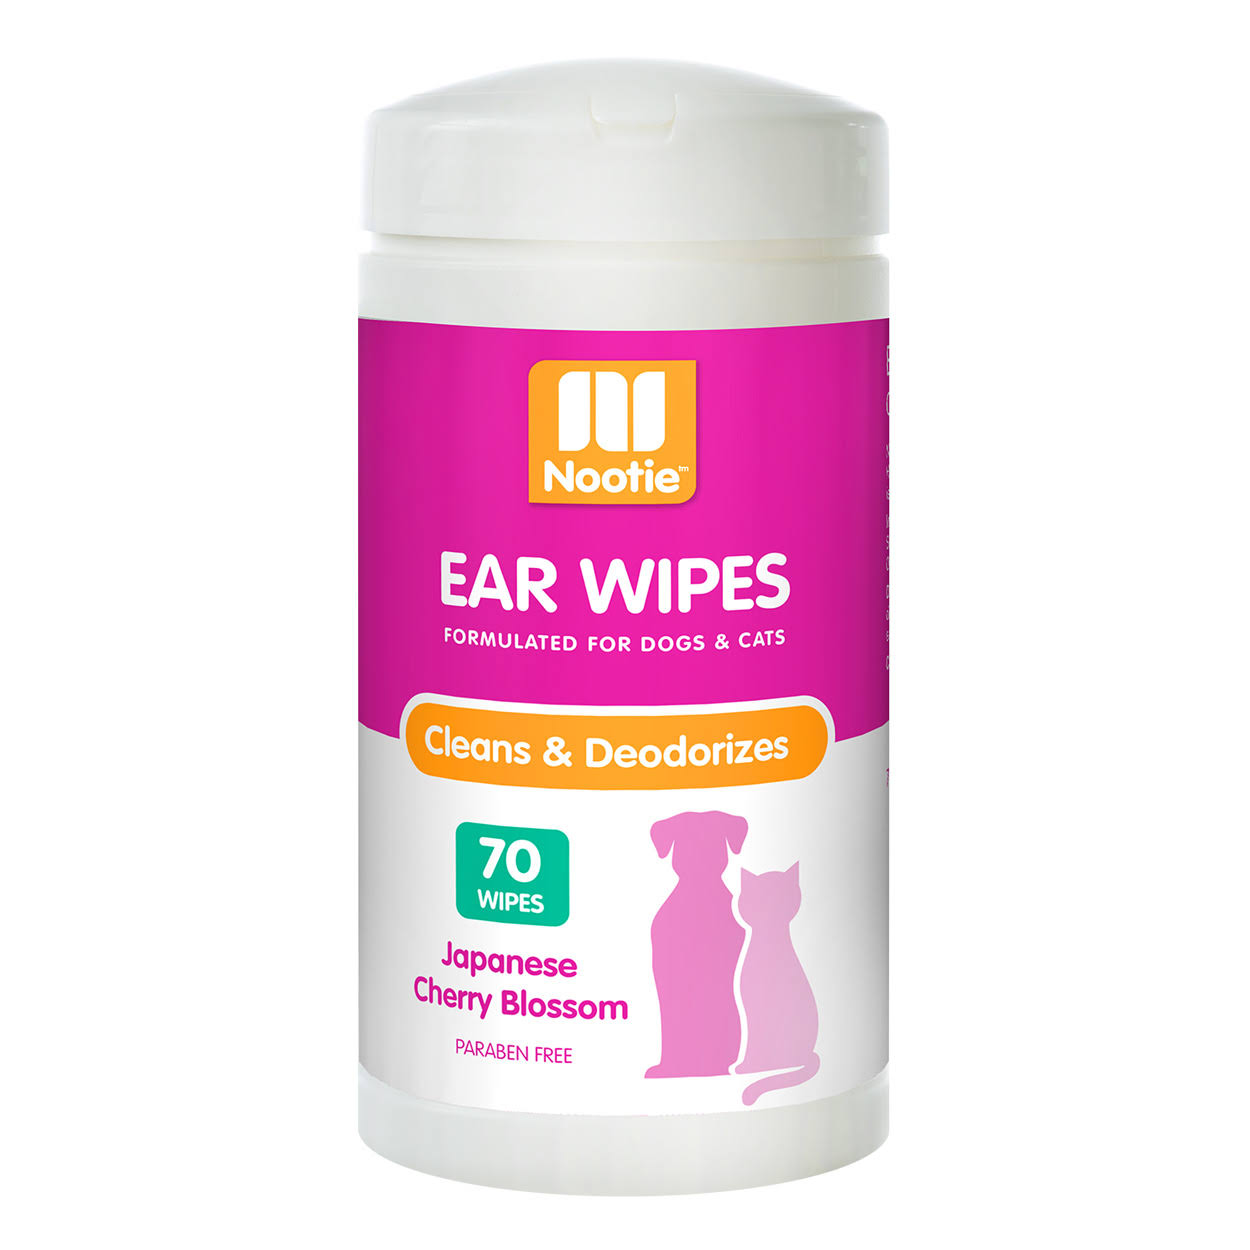 Nootie Ear Wipes - Japanese Cherry Blossom - 70 pk